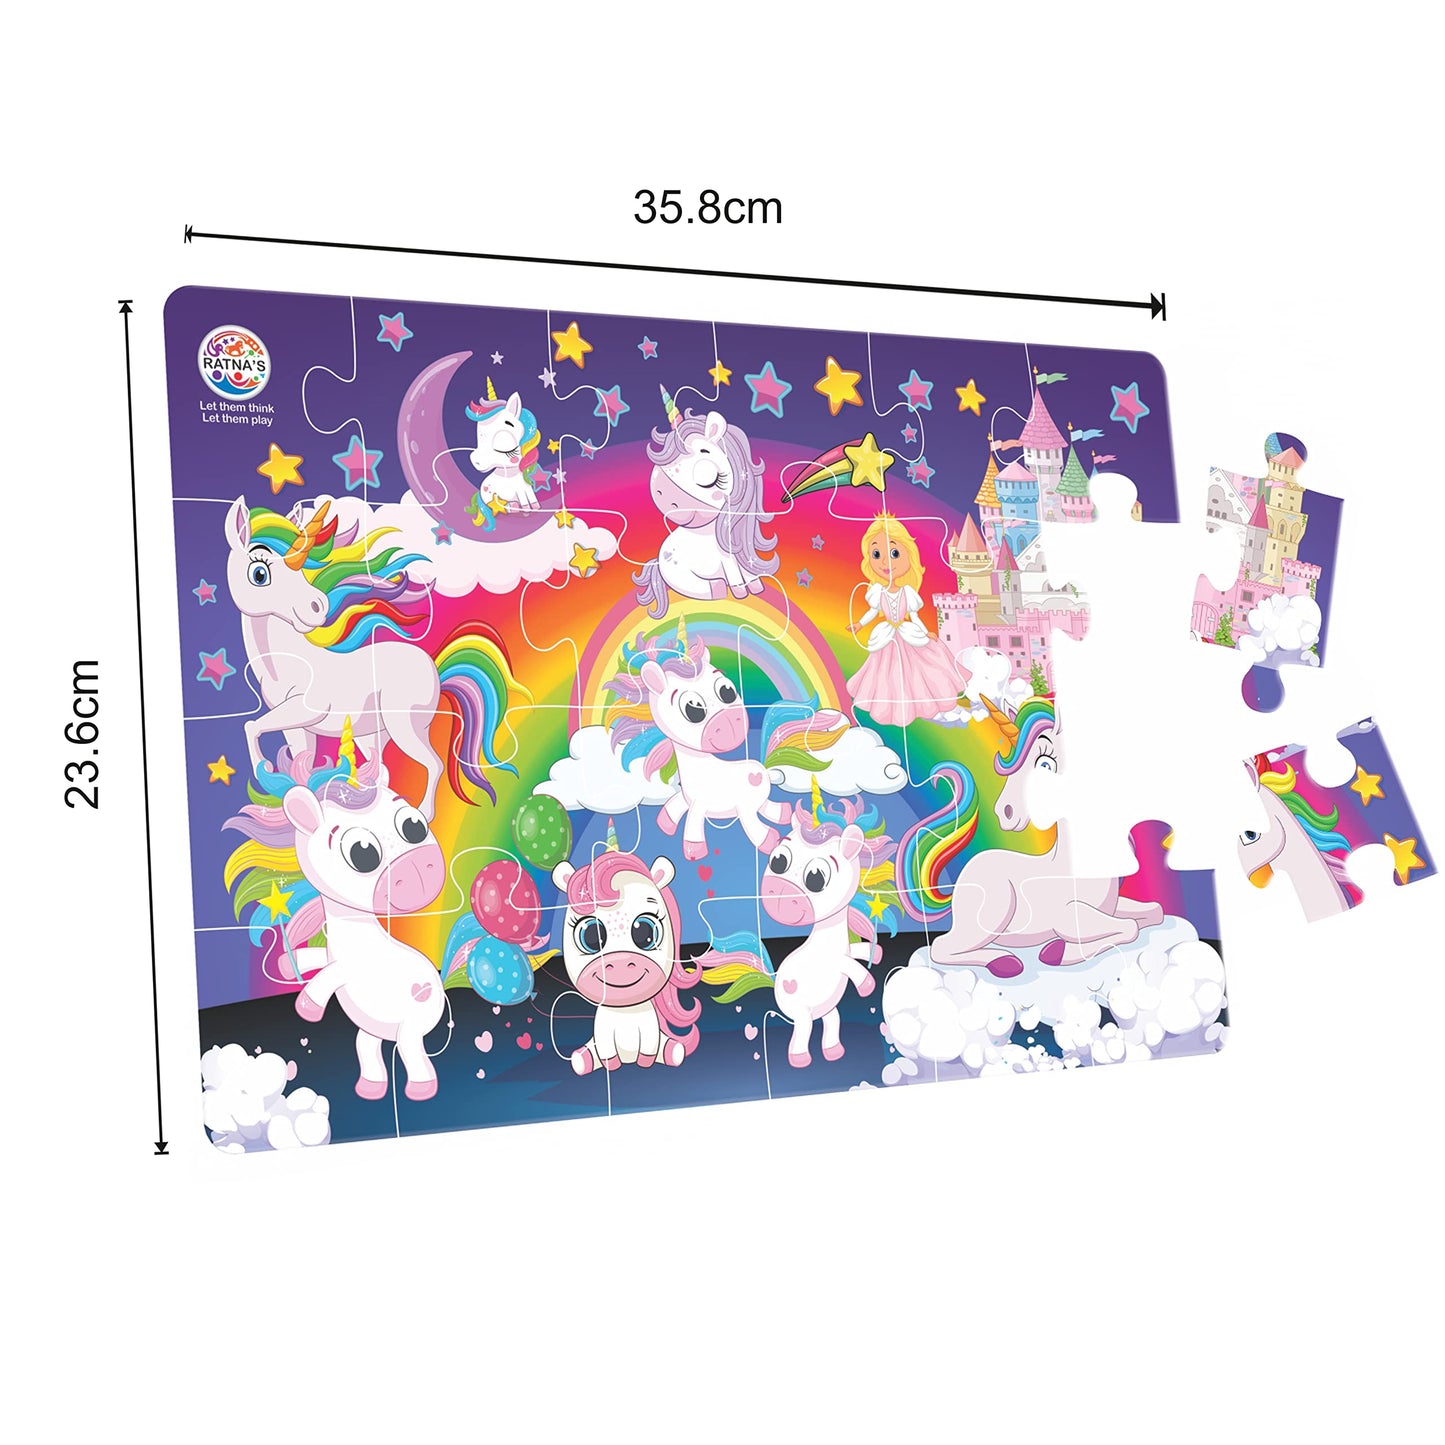 Ratna's Unicorn Little Jigsaw Puzzle 24 Pieces for Kids 3+ Years